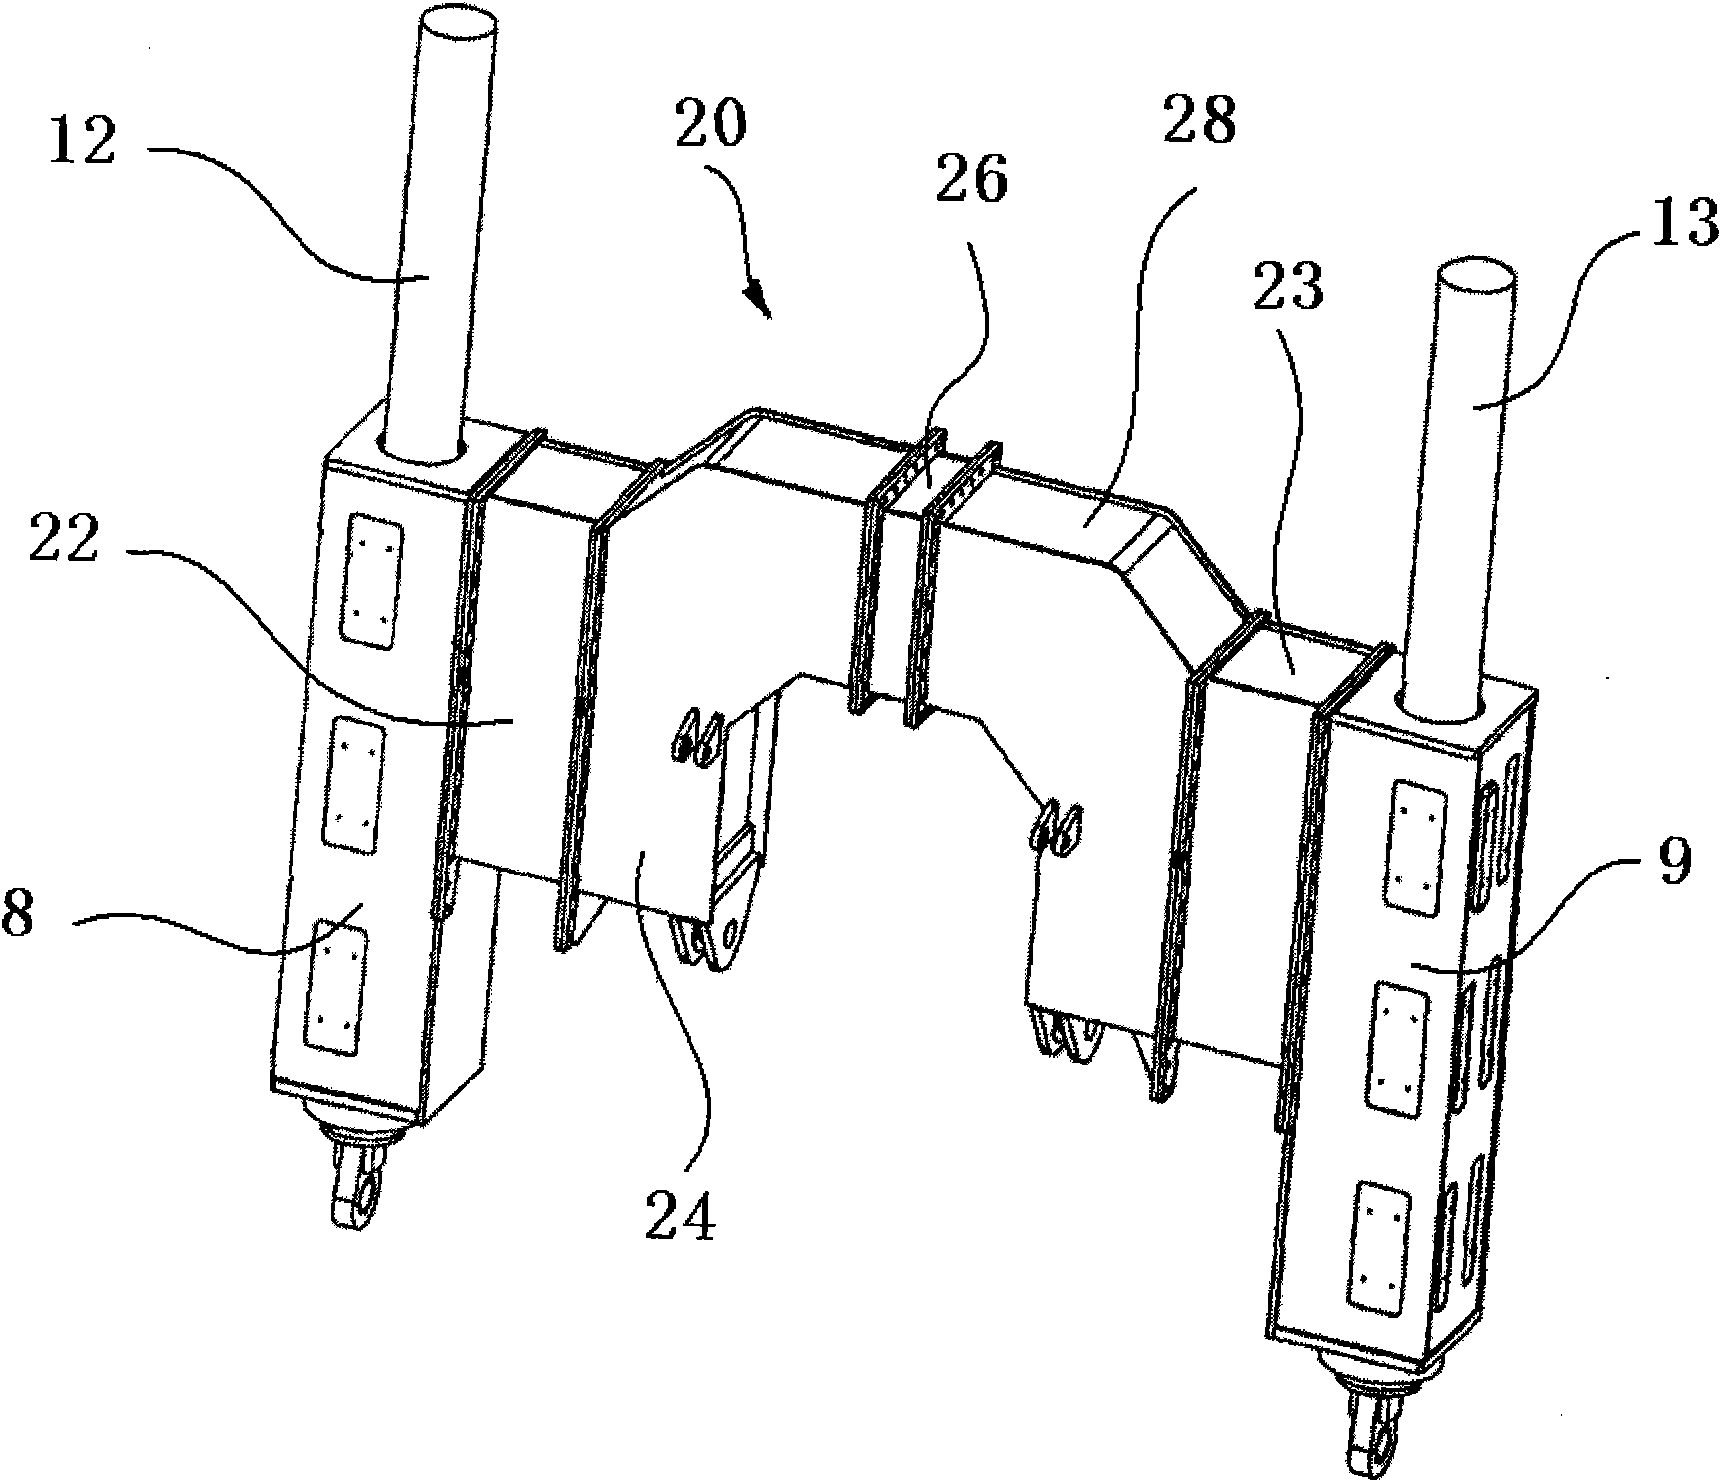 Driller support device